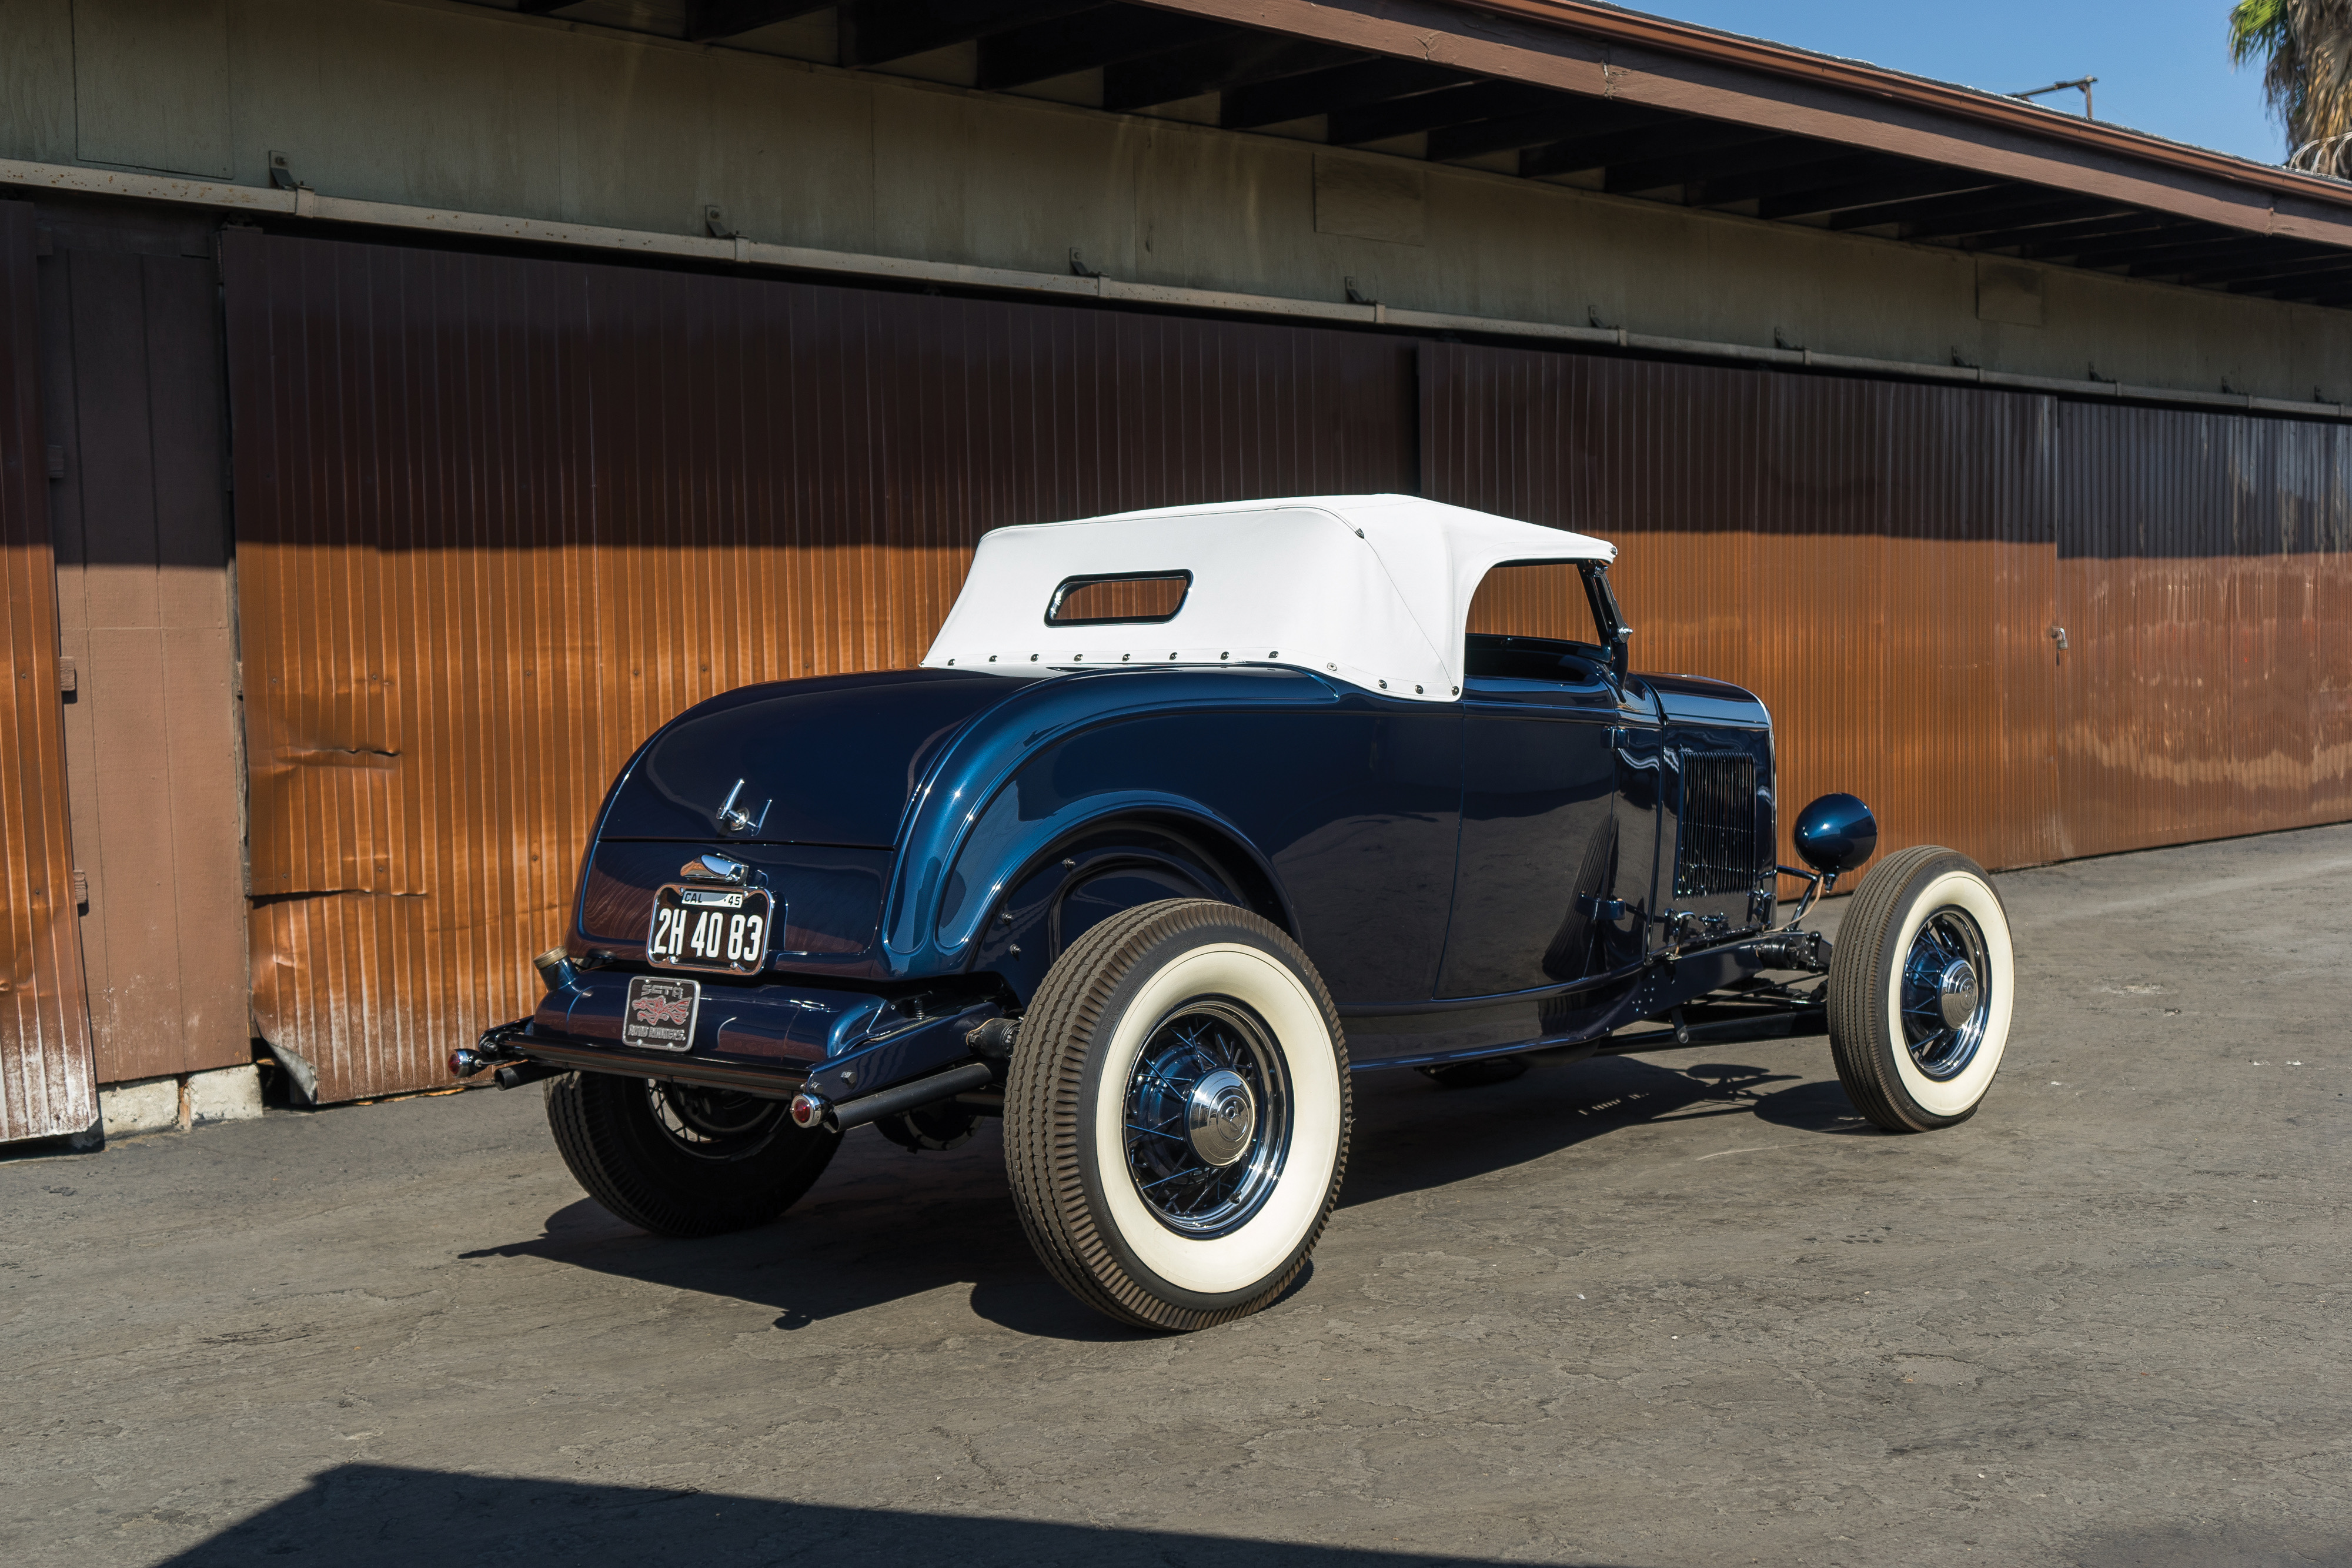 , Hot rod that beat the horse in a race headed to auction, ClassicCars.com Journal